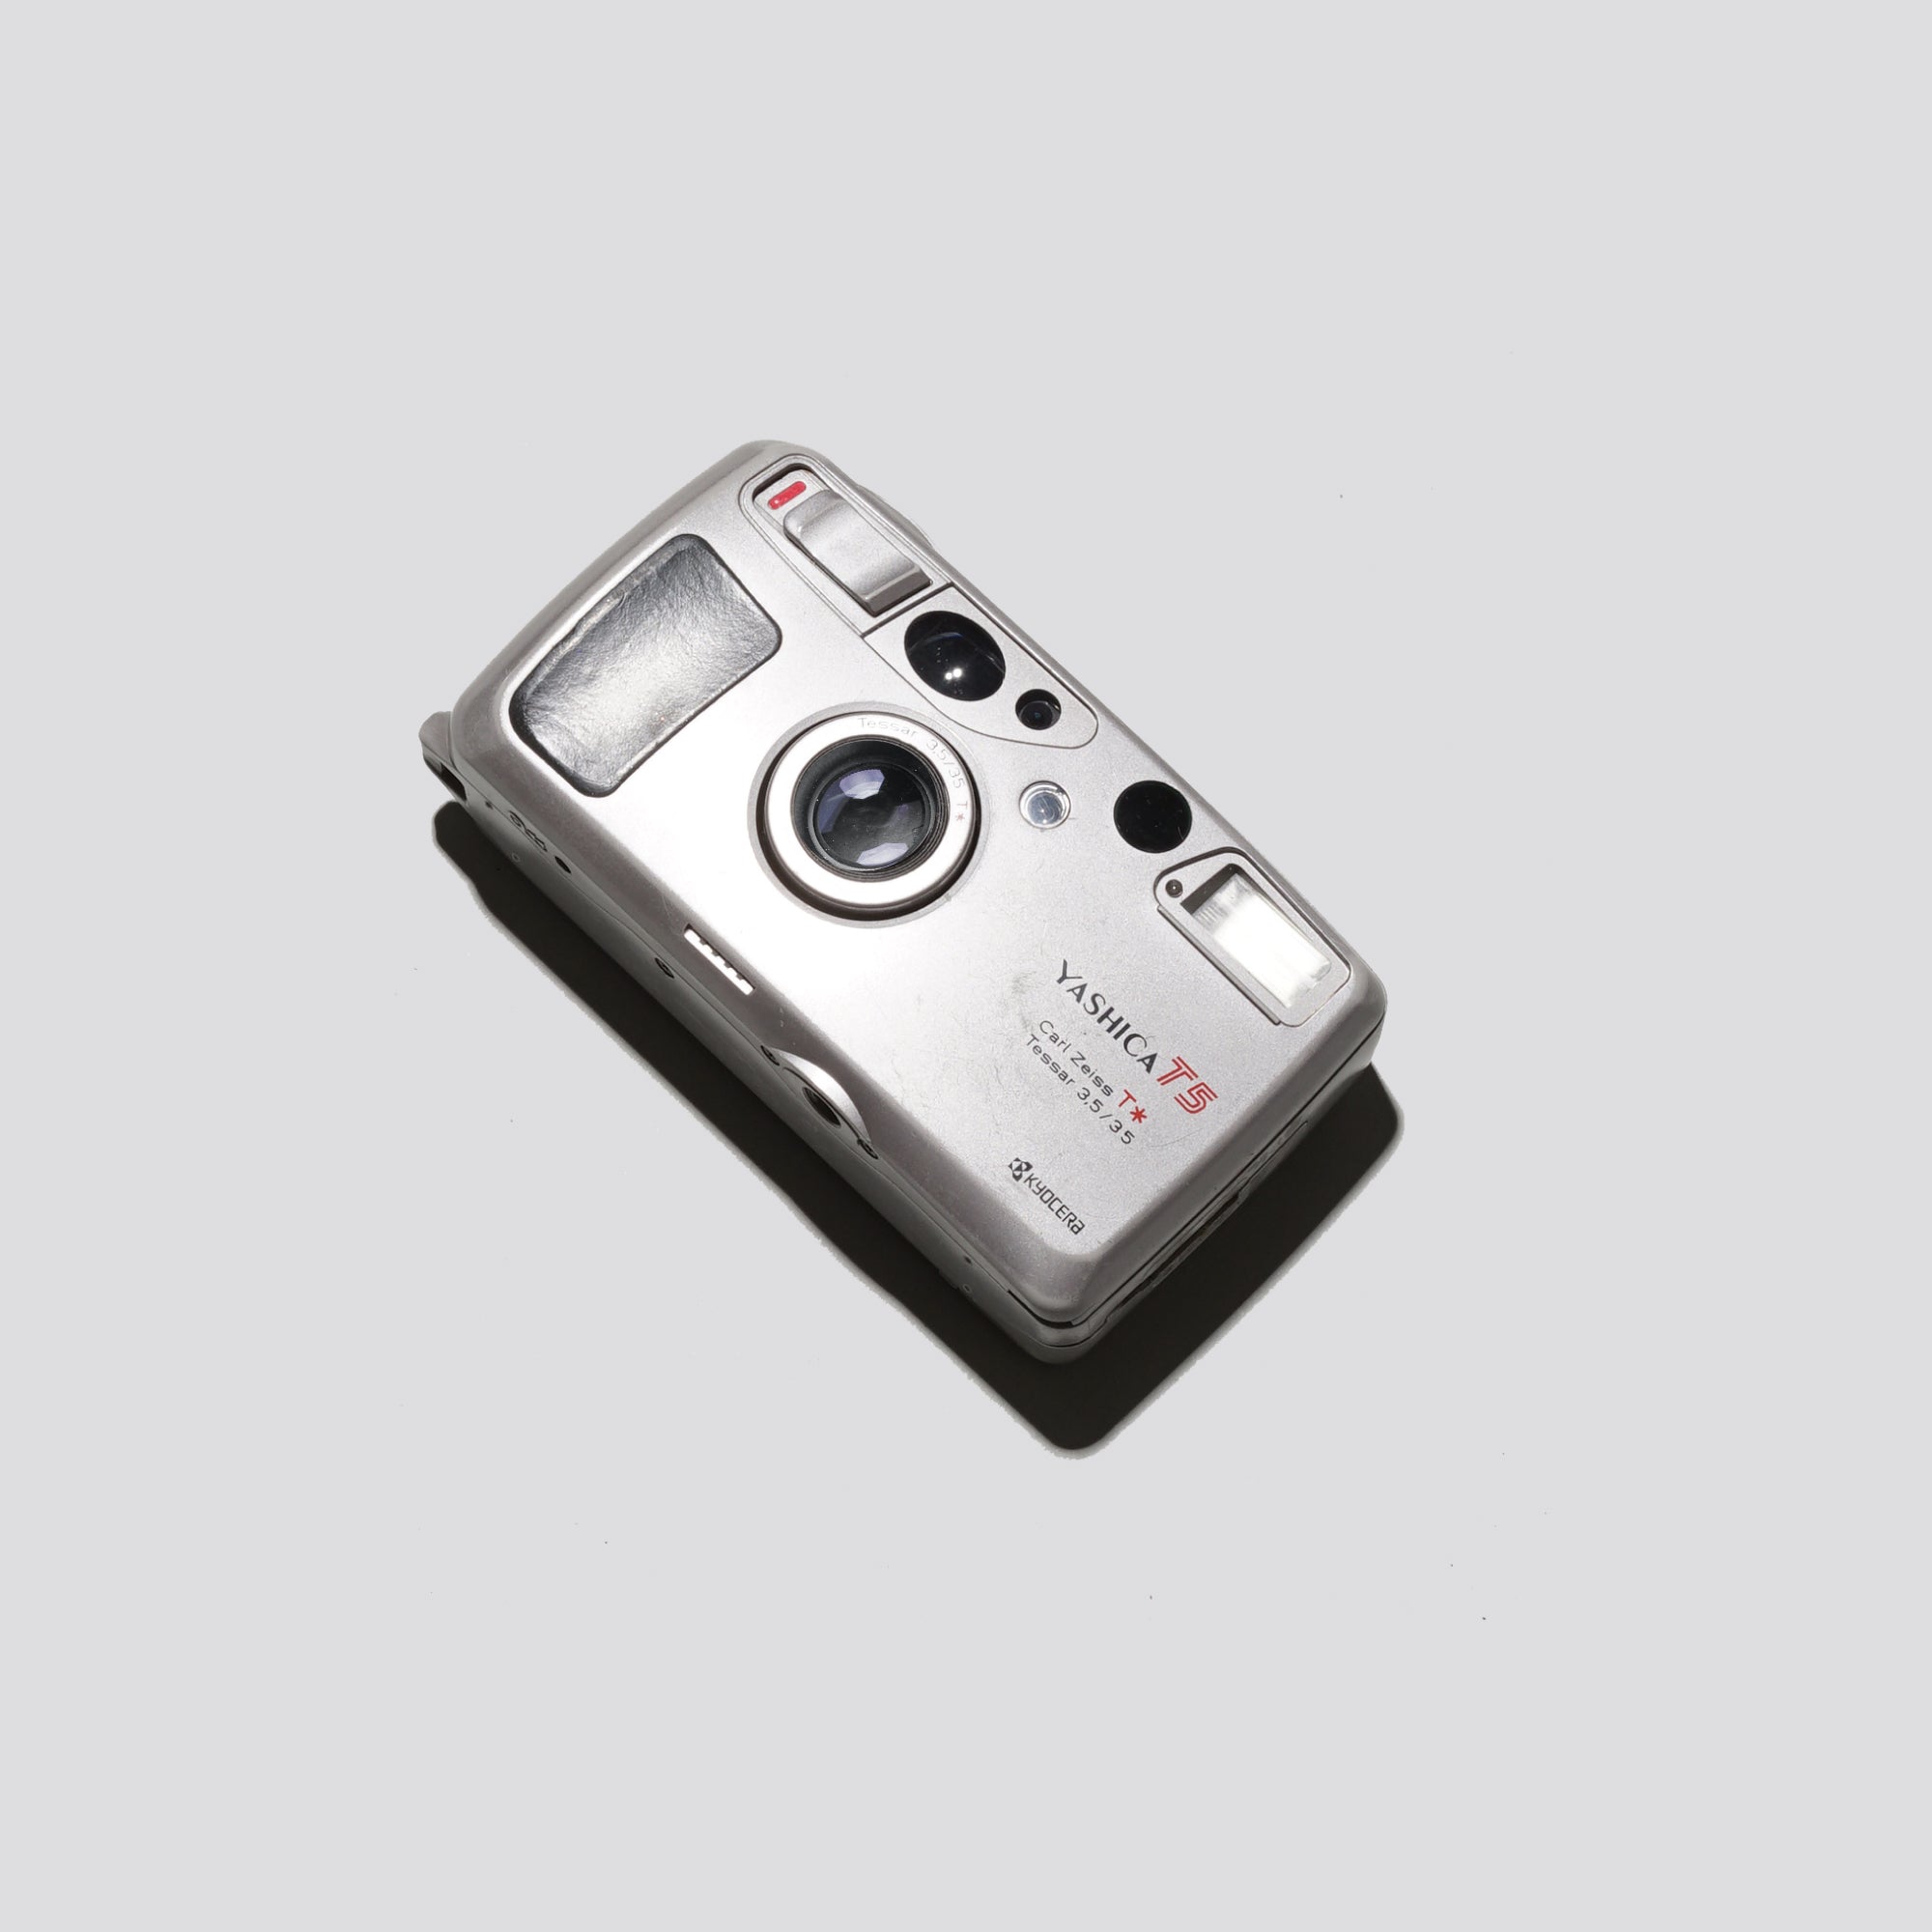 Buy Yashica T5 Grey now at Analogue Amsterdam